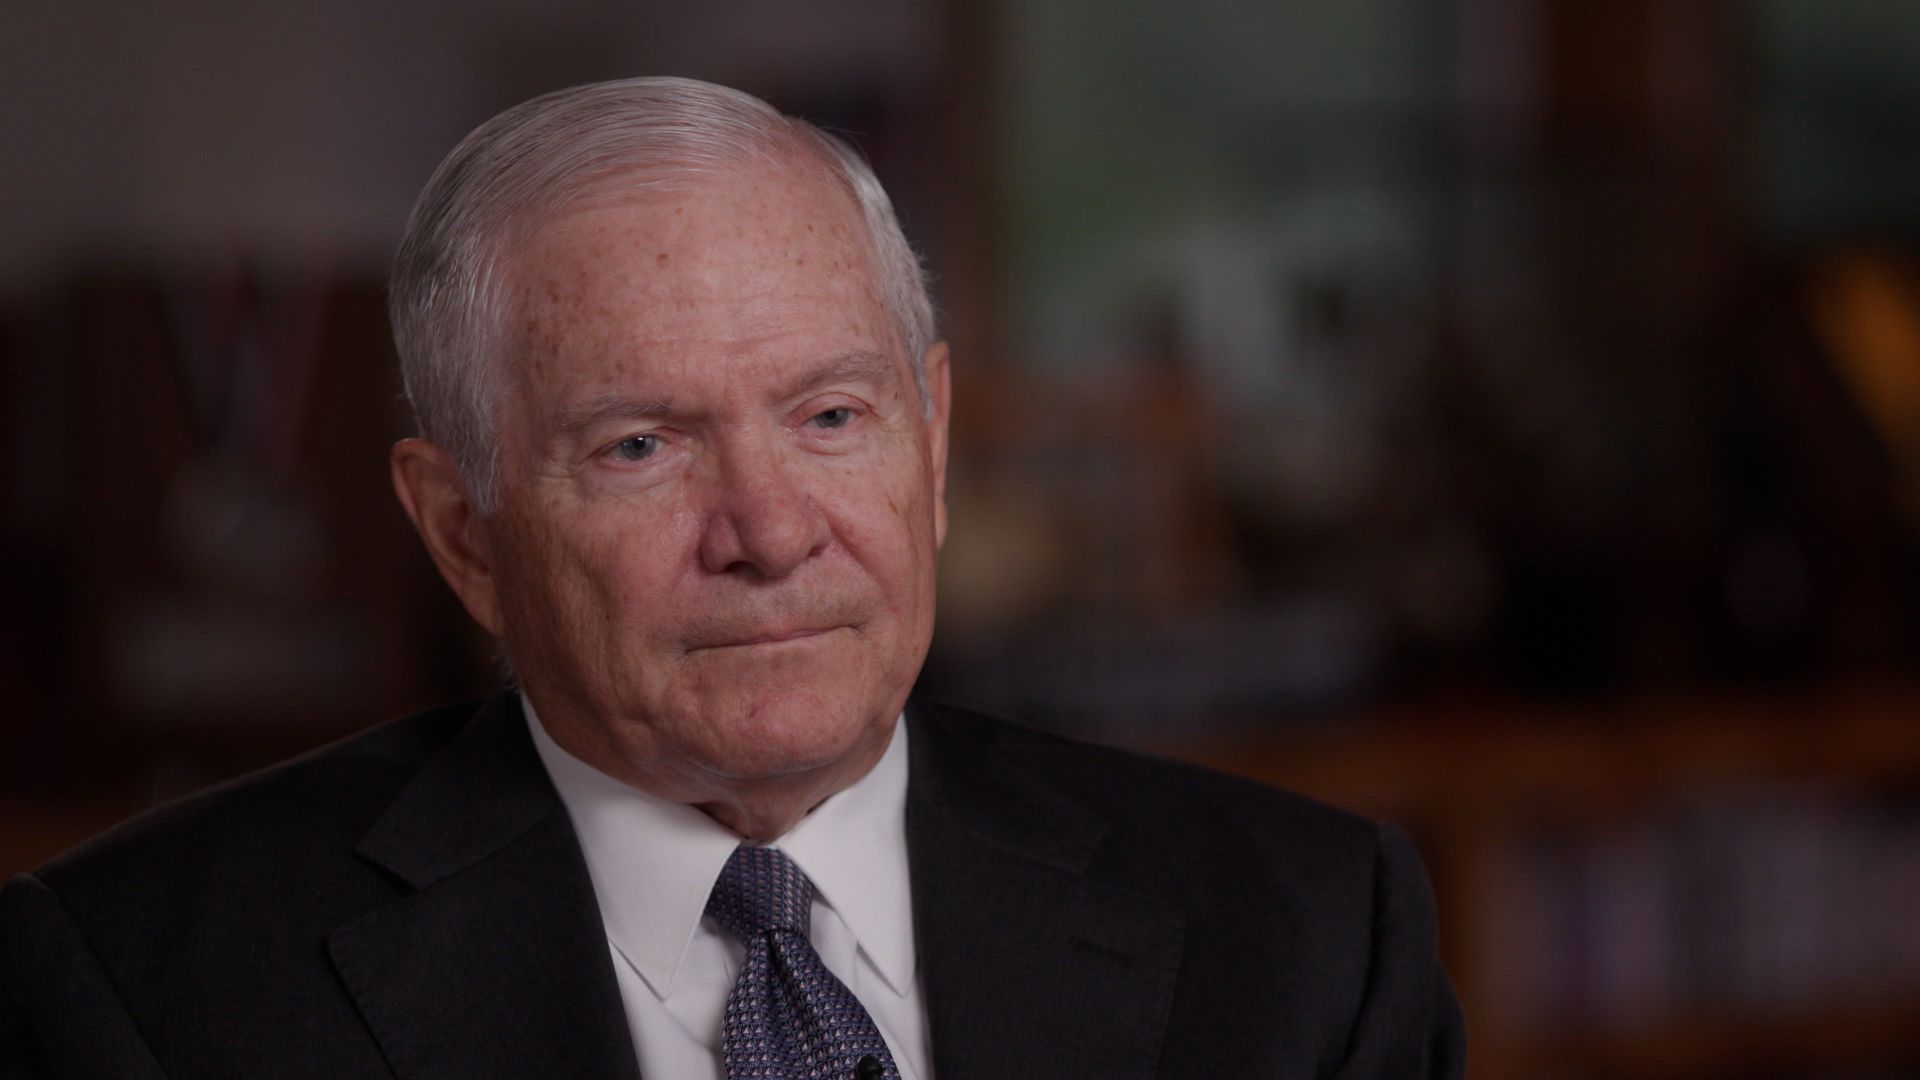 Former Defense Secretary Robert Gates being interviewed on CBS' "60 Minutes" for Sunday's show.